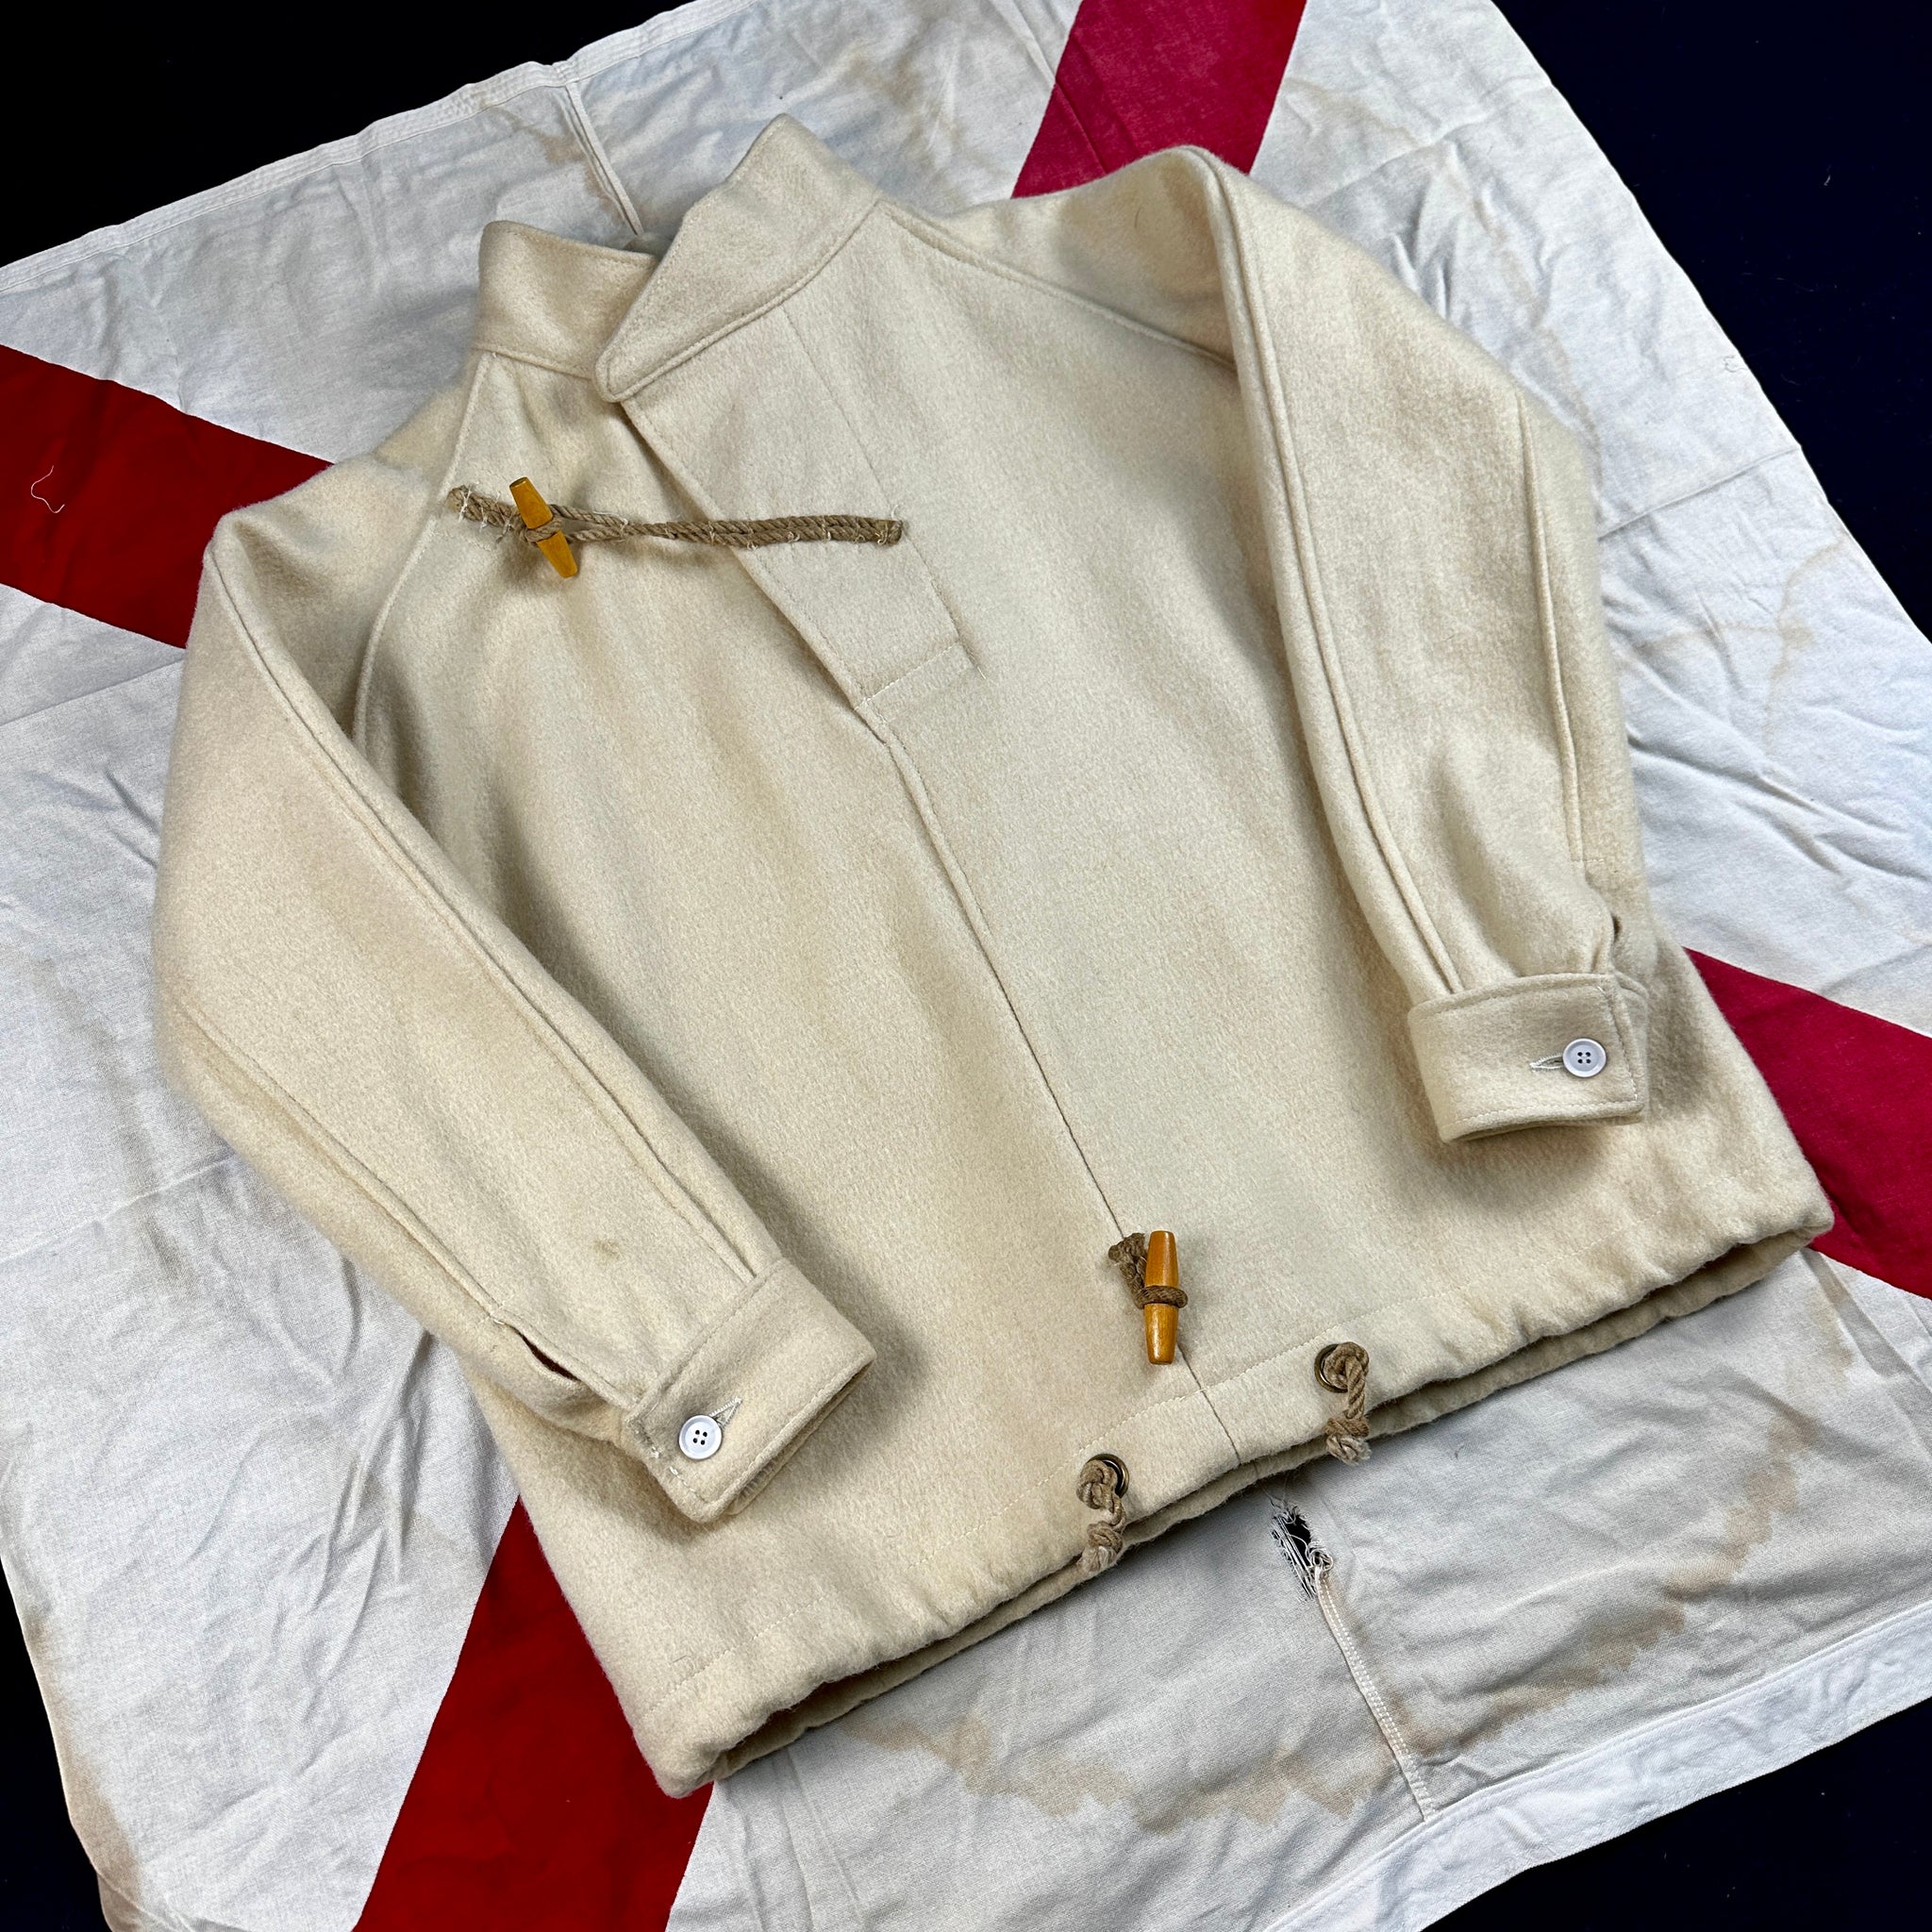 Royal Navy 1950s/60s Fearnought Jacket – The Major's Tailor